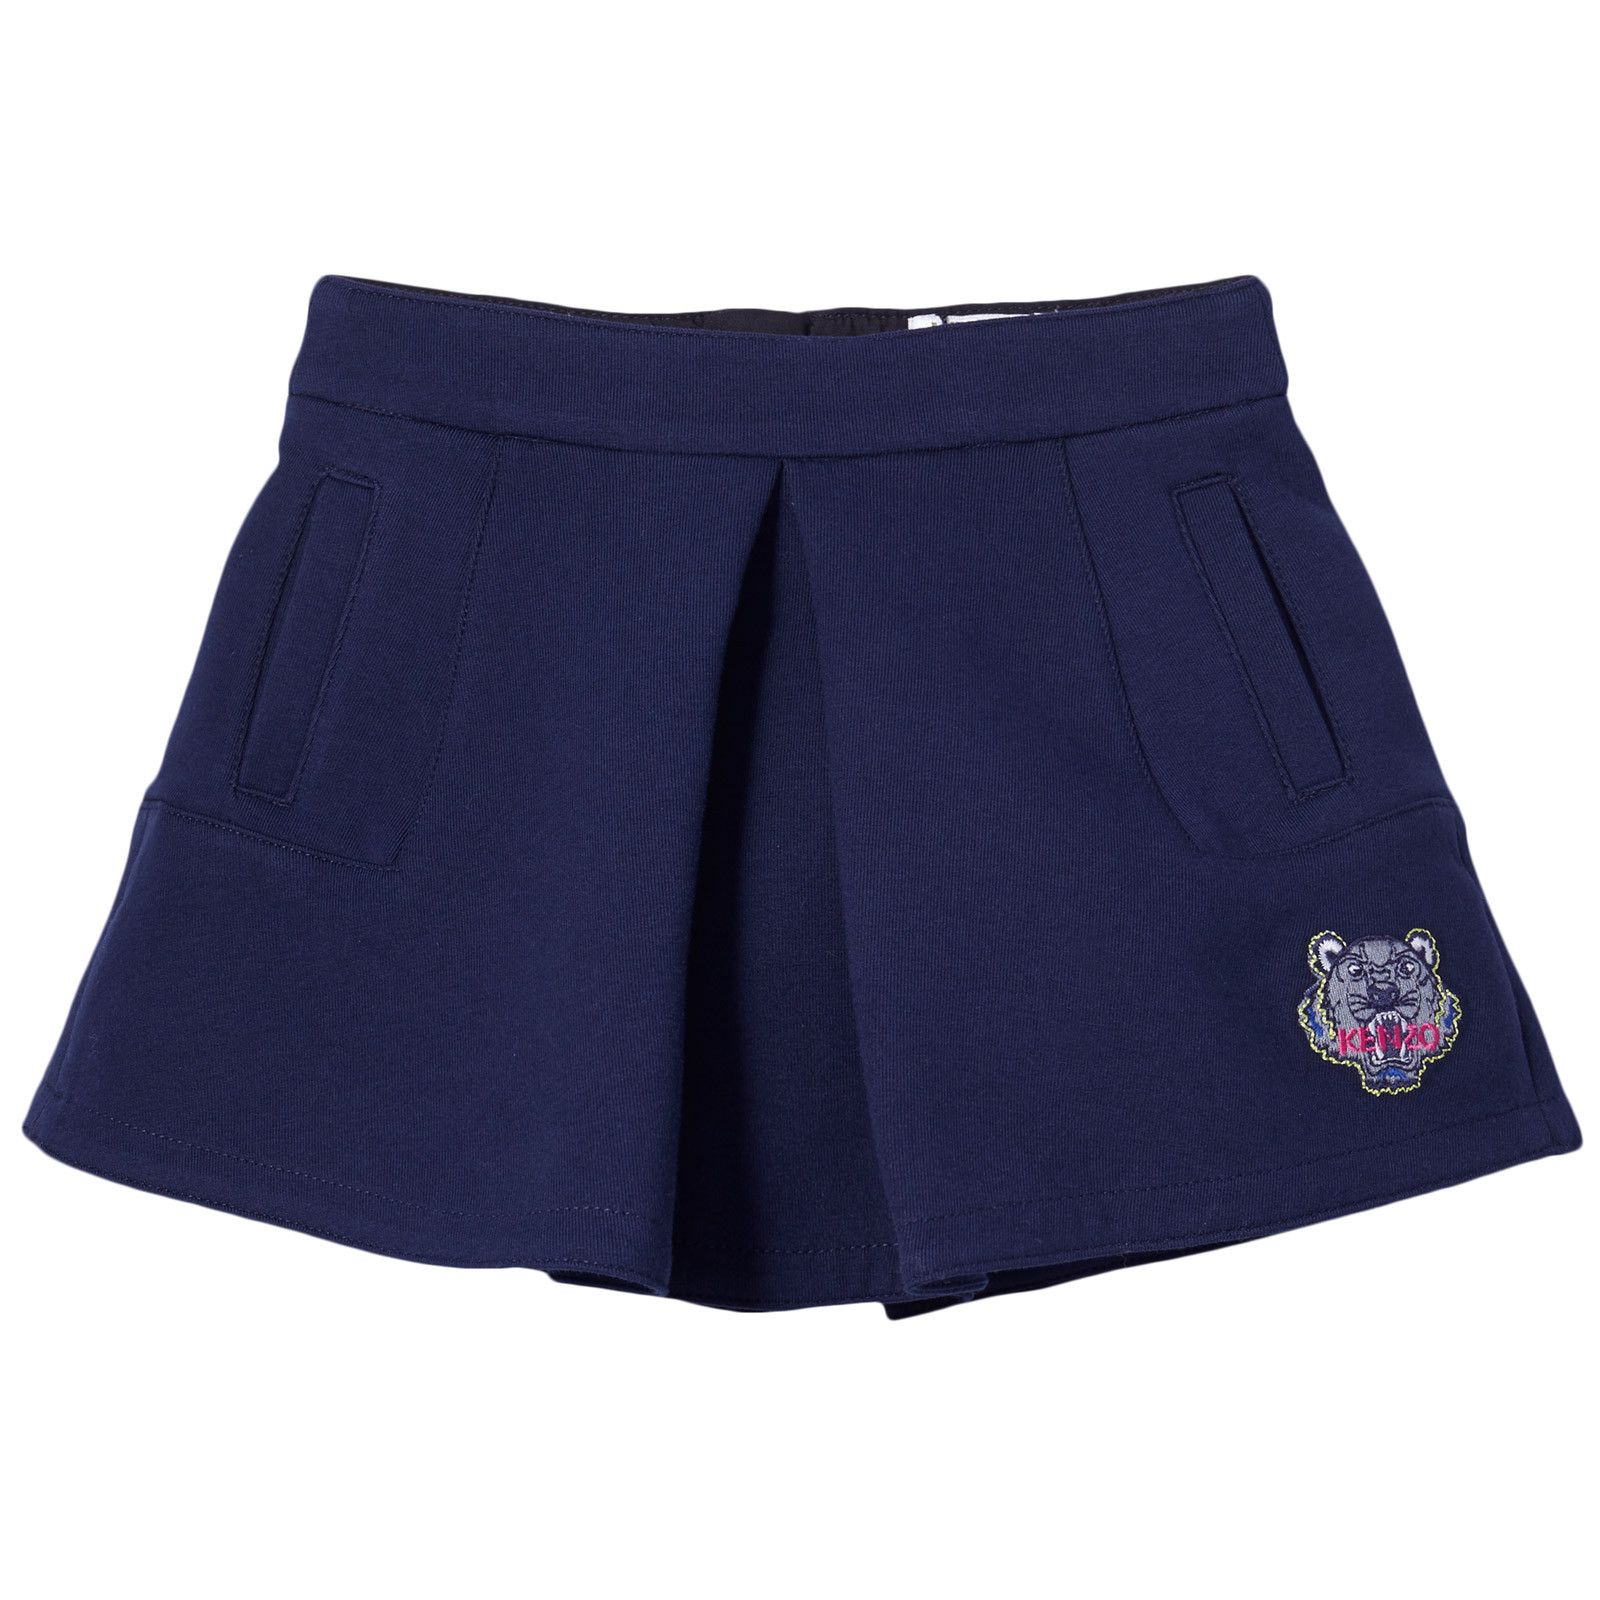 Girls Navy Blue Embroidered Logo Skirt With Pockets - CÉMAROSE | Children's Fashion Store - 1